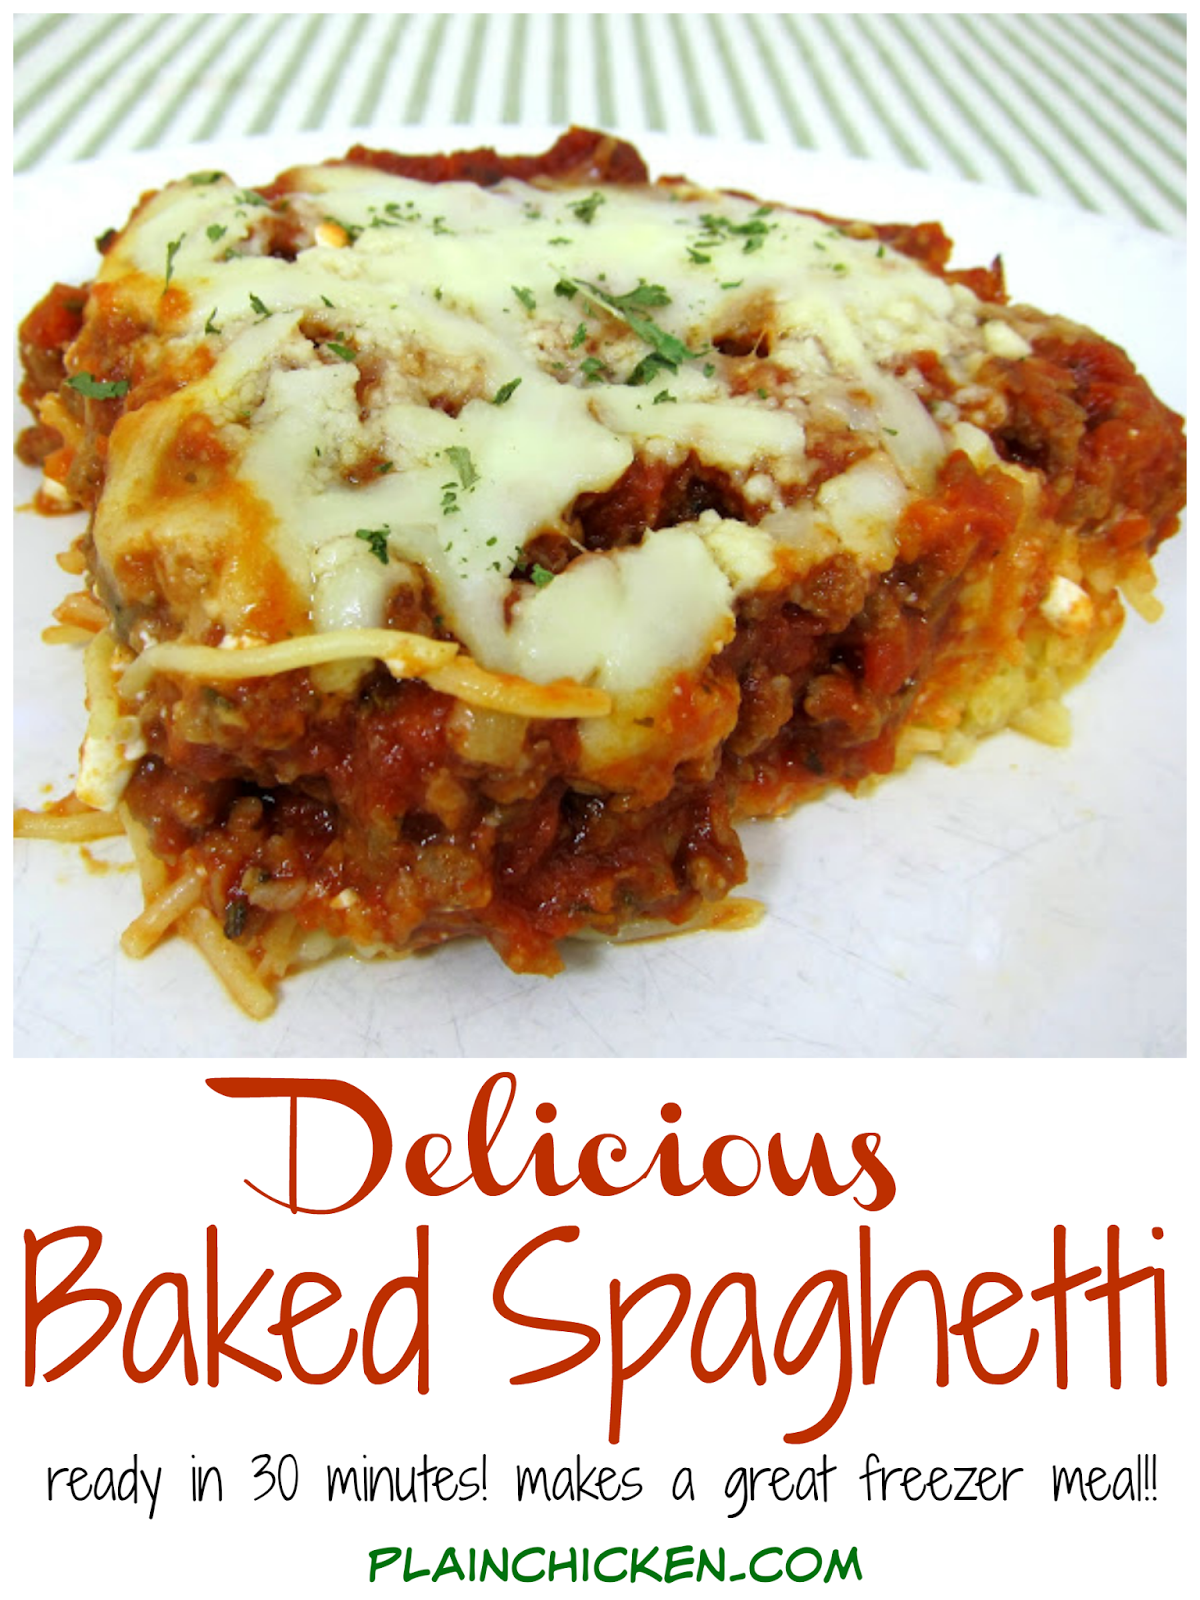 Delicious Baked Spaghetti Casserole - spaghetti, egg, parmesan, cottage cheese, sausage/hamburger, crushed tomatoes, tomato paste, spices and mozzarella - SOOO good! Baked pasta topped with a quick homemade sauce. Makes a great freezer meal!